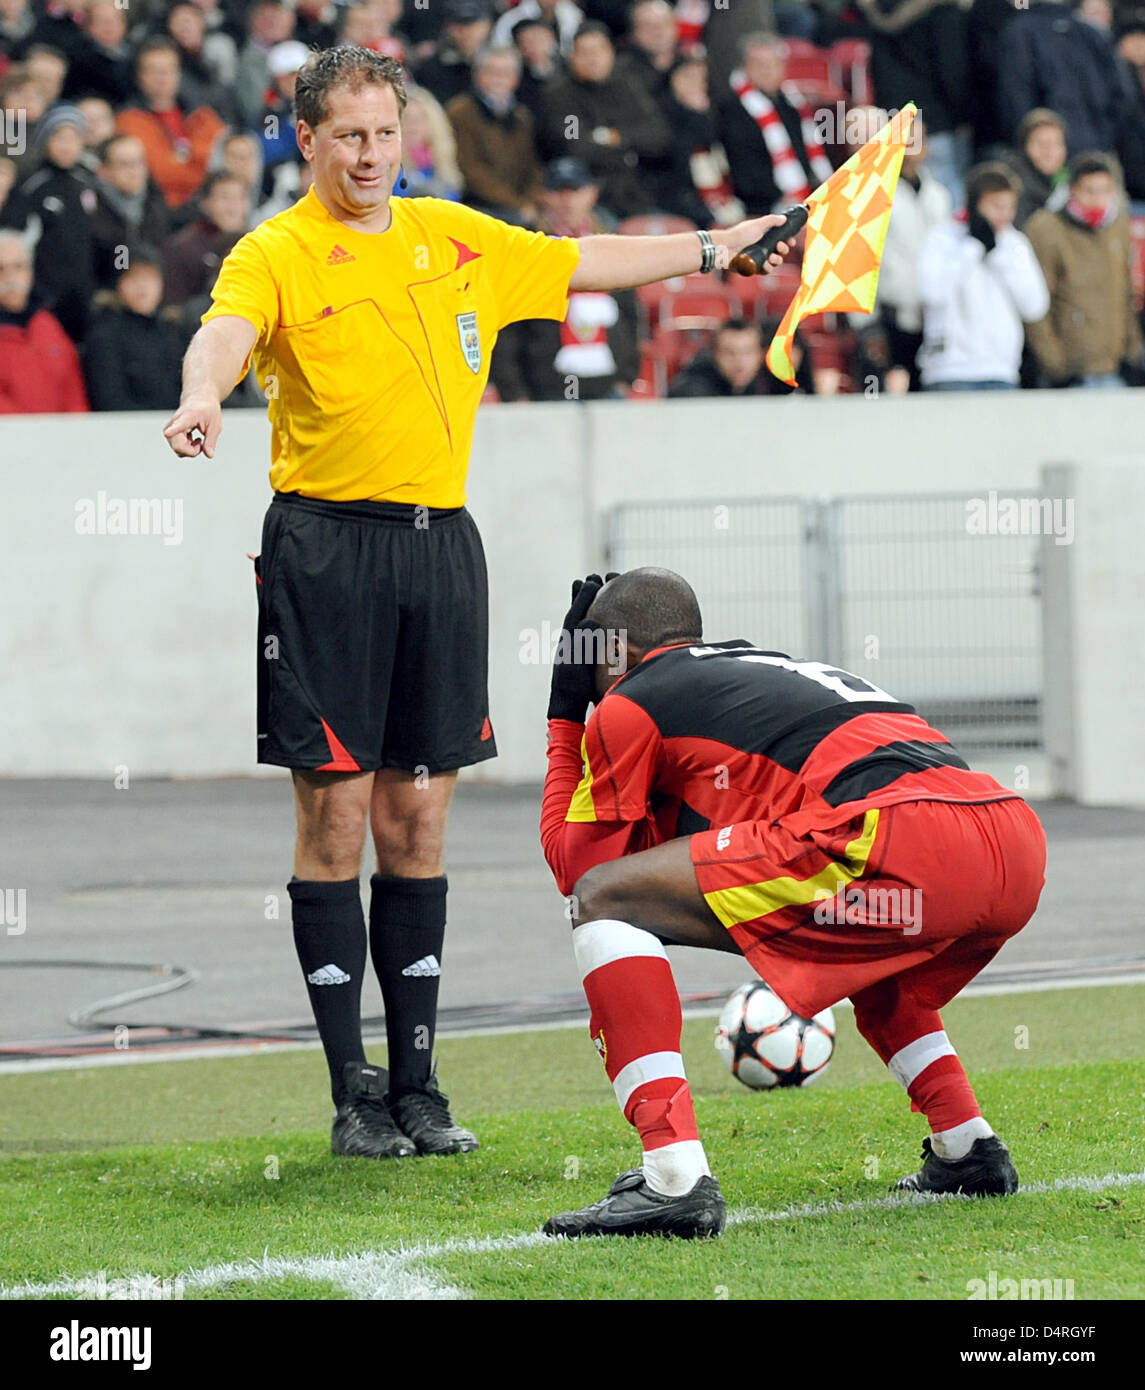 Sevilla?s Didier Zokora (R) quarrels with a decision of the linesman during the Champions League group stage match between German Bundesliga club VfB Stuttgart and Spanish side FC Sevilla at Mercedes-Benz Arena in Stuttgart, Germany, 20 October 2009. Sevilla defeated Stuttgart 3-1. Photo: Bernd Weissbrod Stock Photo